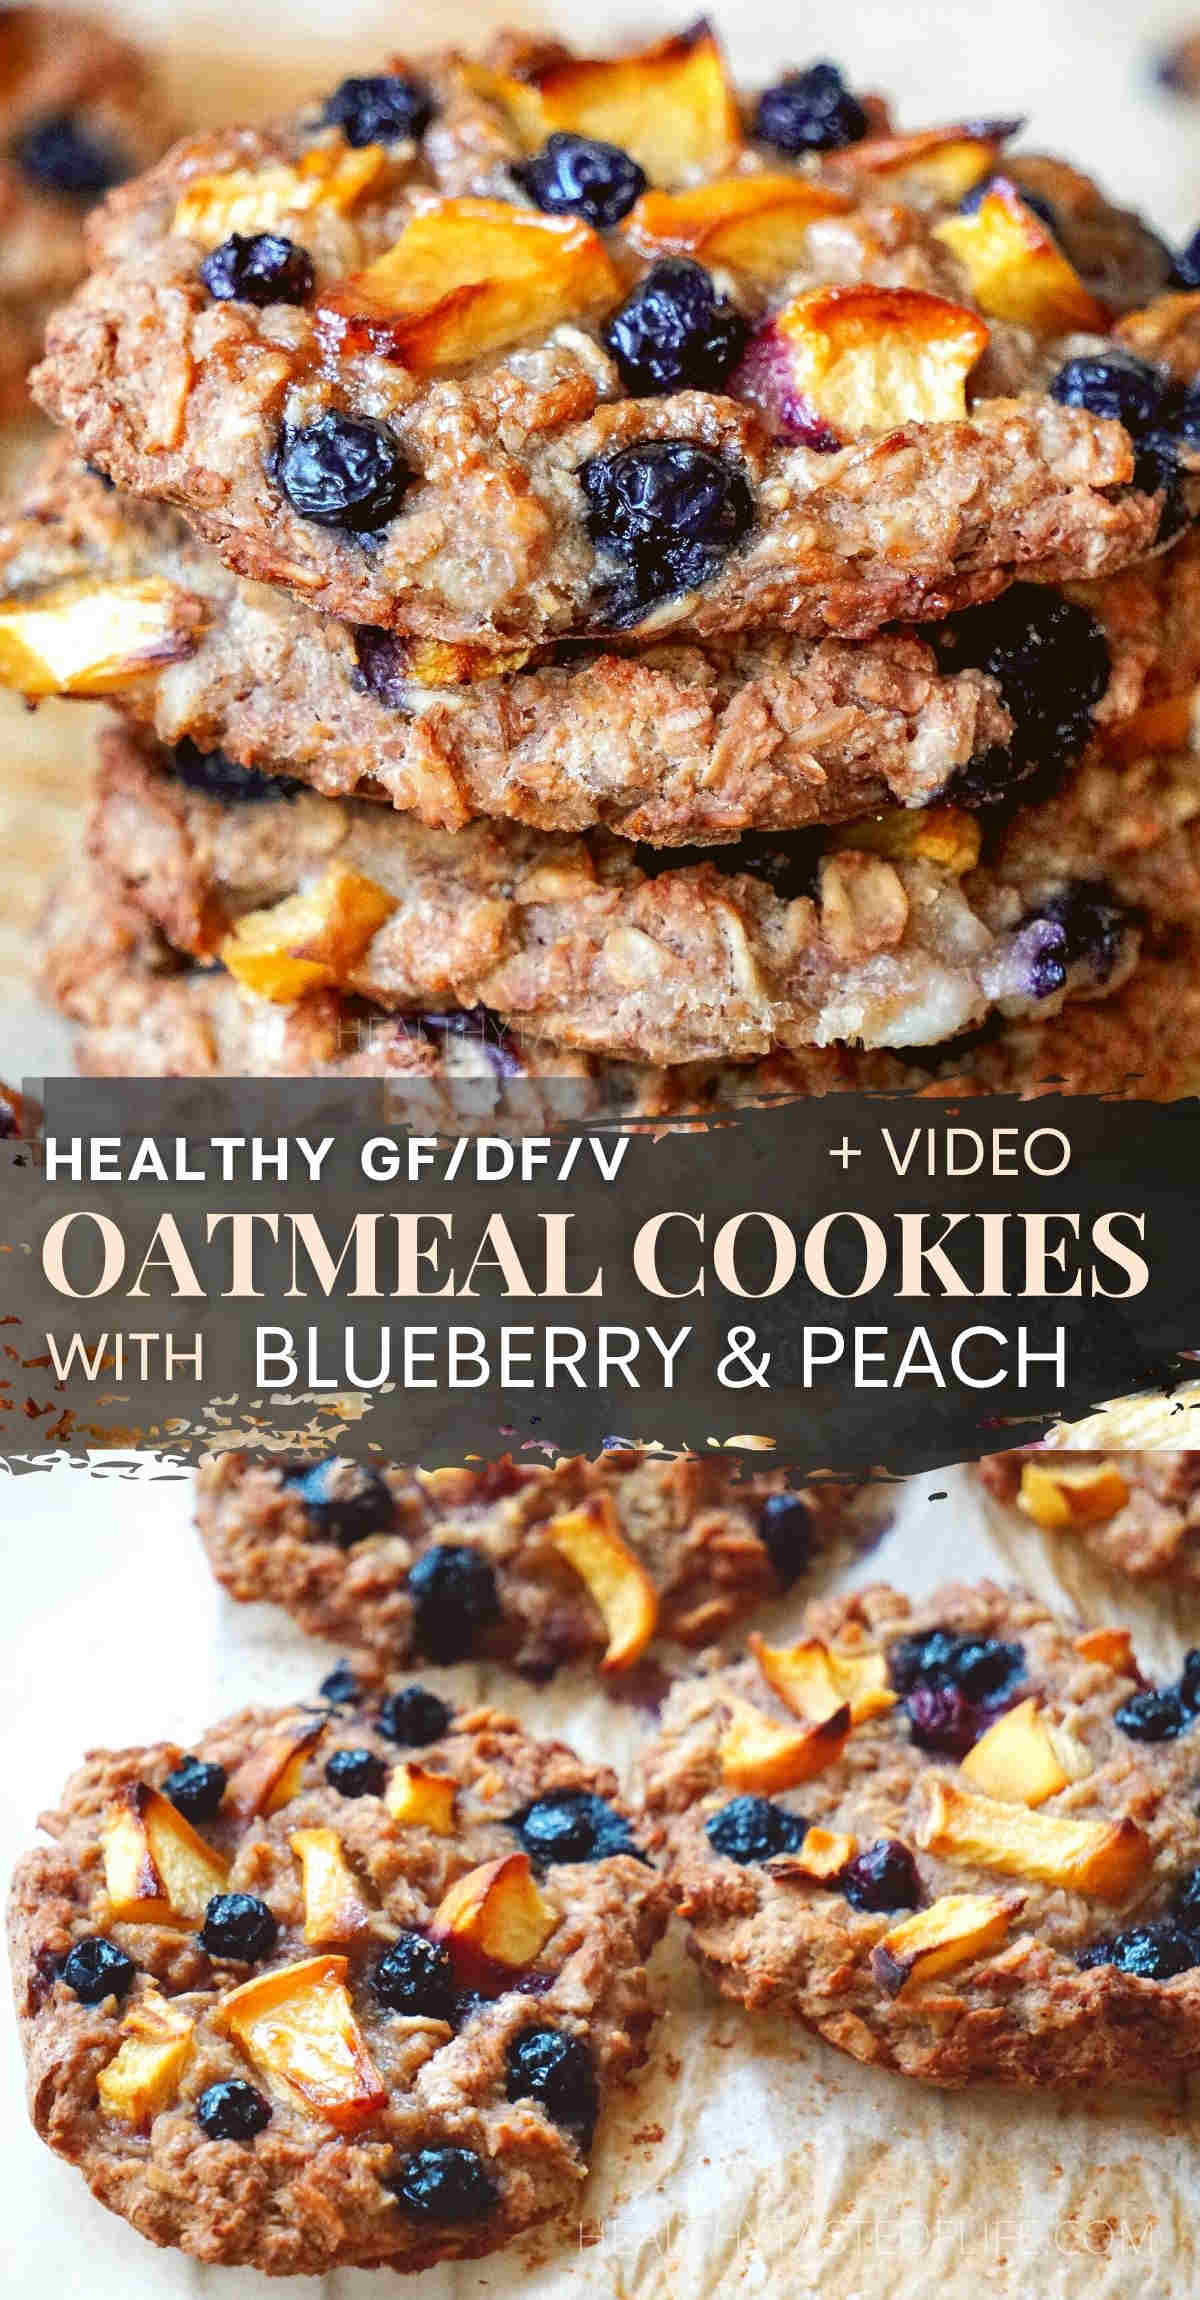 Healthy Oatmeal Cookies With Blueberries And Peach. Due to their clean ingredients and low sugar, these blueberry oatmeal cookies are more like a healthy snack than a dessert. Simple eggless oatmeal cookie recipe with rolled oats, apple sauce, fresh blueberries and peach that is also gluten free, dairy free and vegan friendly. #oatmealcookies #blueberryoatmealcookies #healthyoatmealcookies #healthycookies #veganoatmealcookies